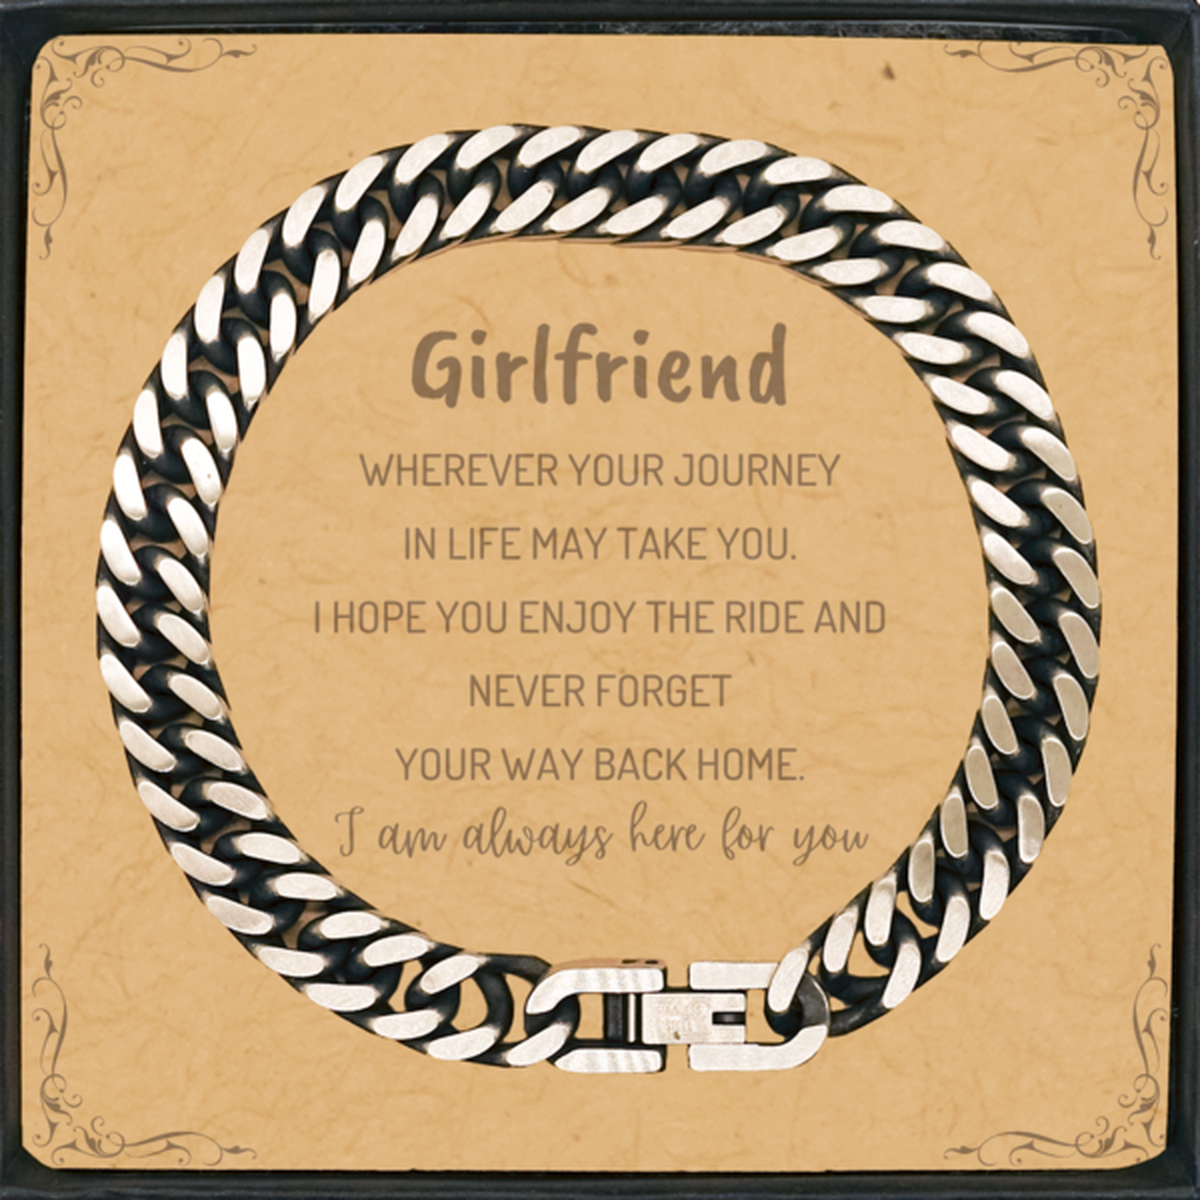 Girlfriend wherever your journey in life may take you, I am always here for you Girlfriend Cuban Link Chain Bracelet, Awesome Christmas Gifts For Girlfriend Message Card, Girlfriend Birthday Gifts for Men Women Family Loved One